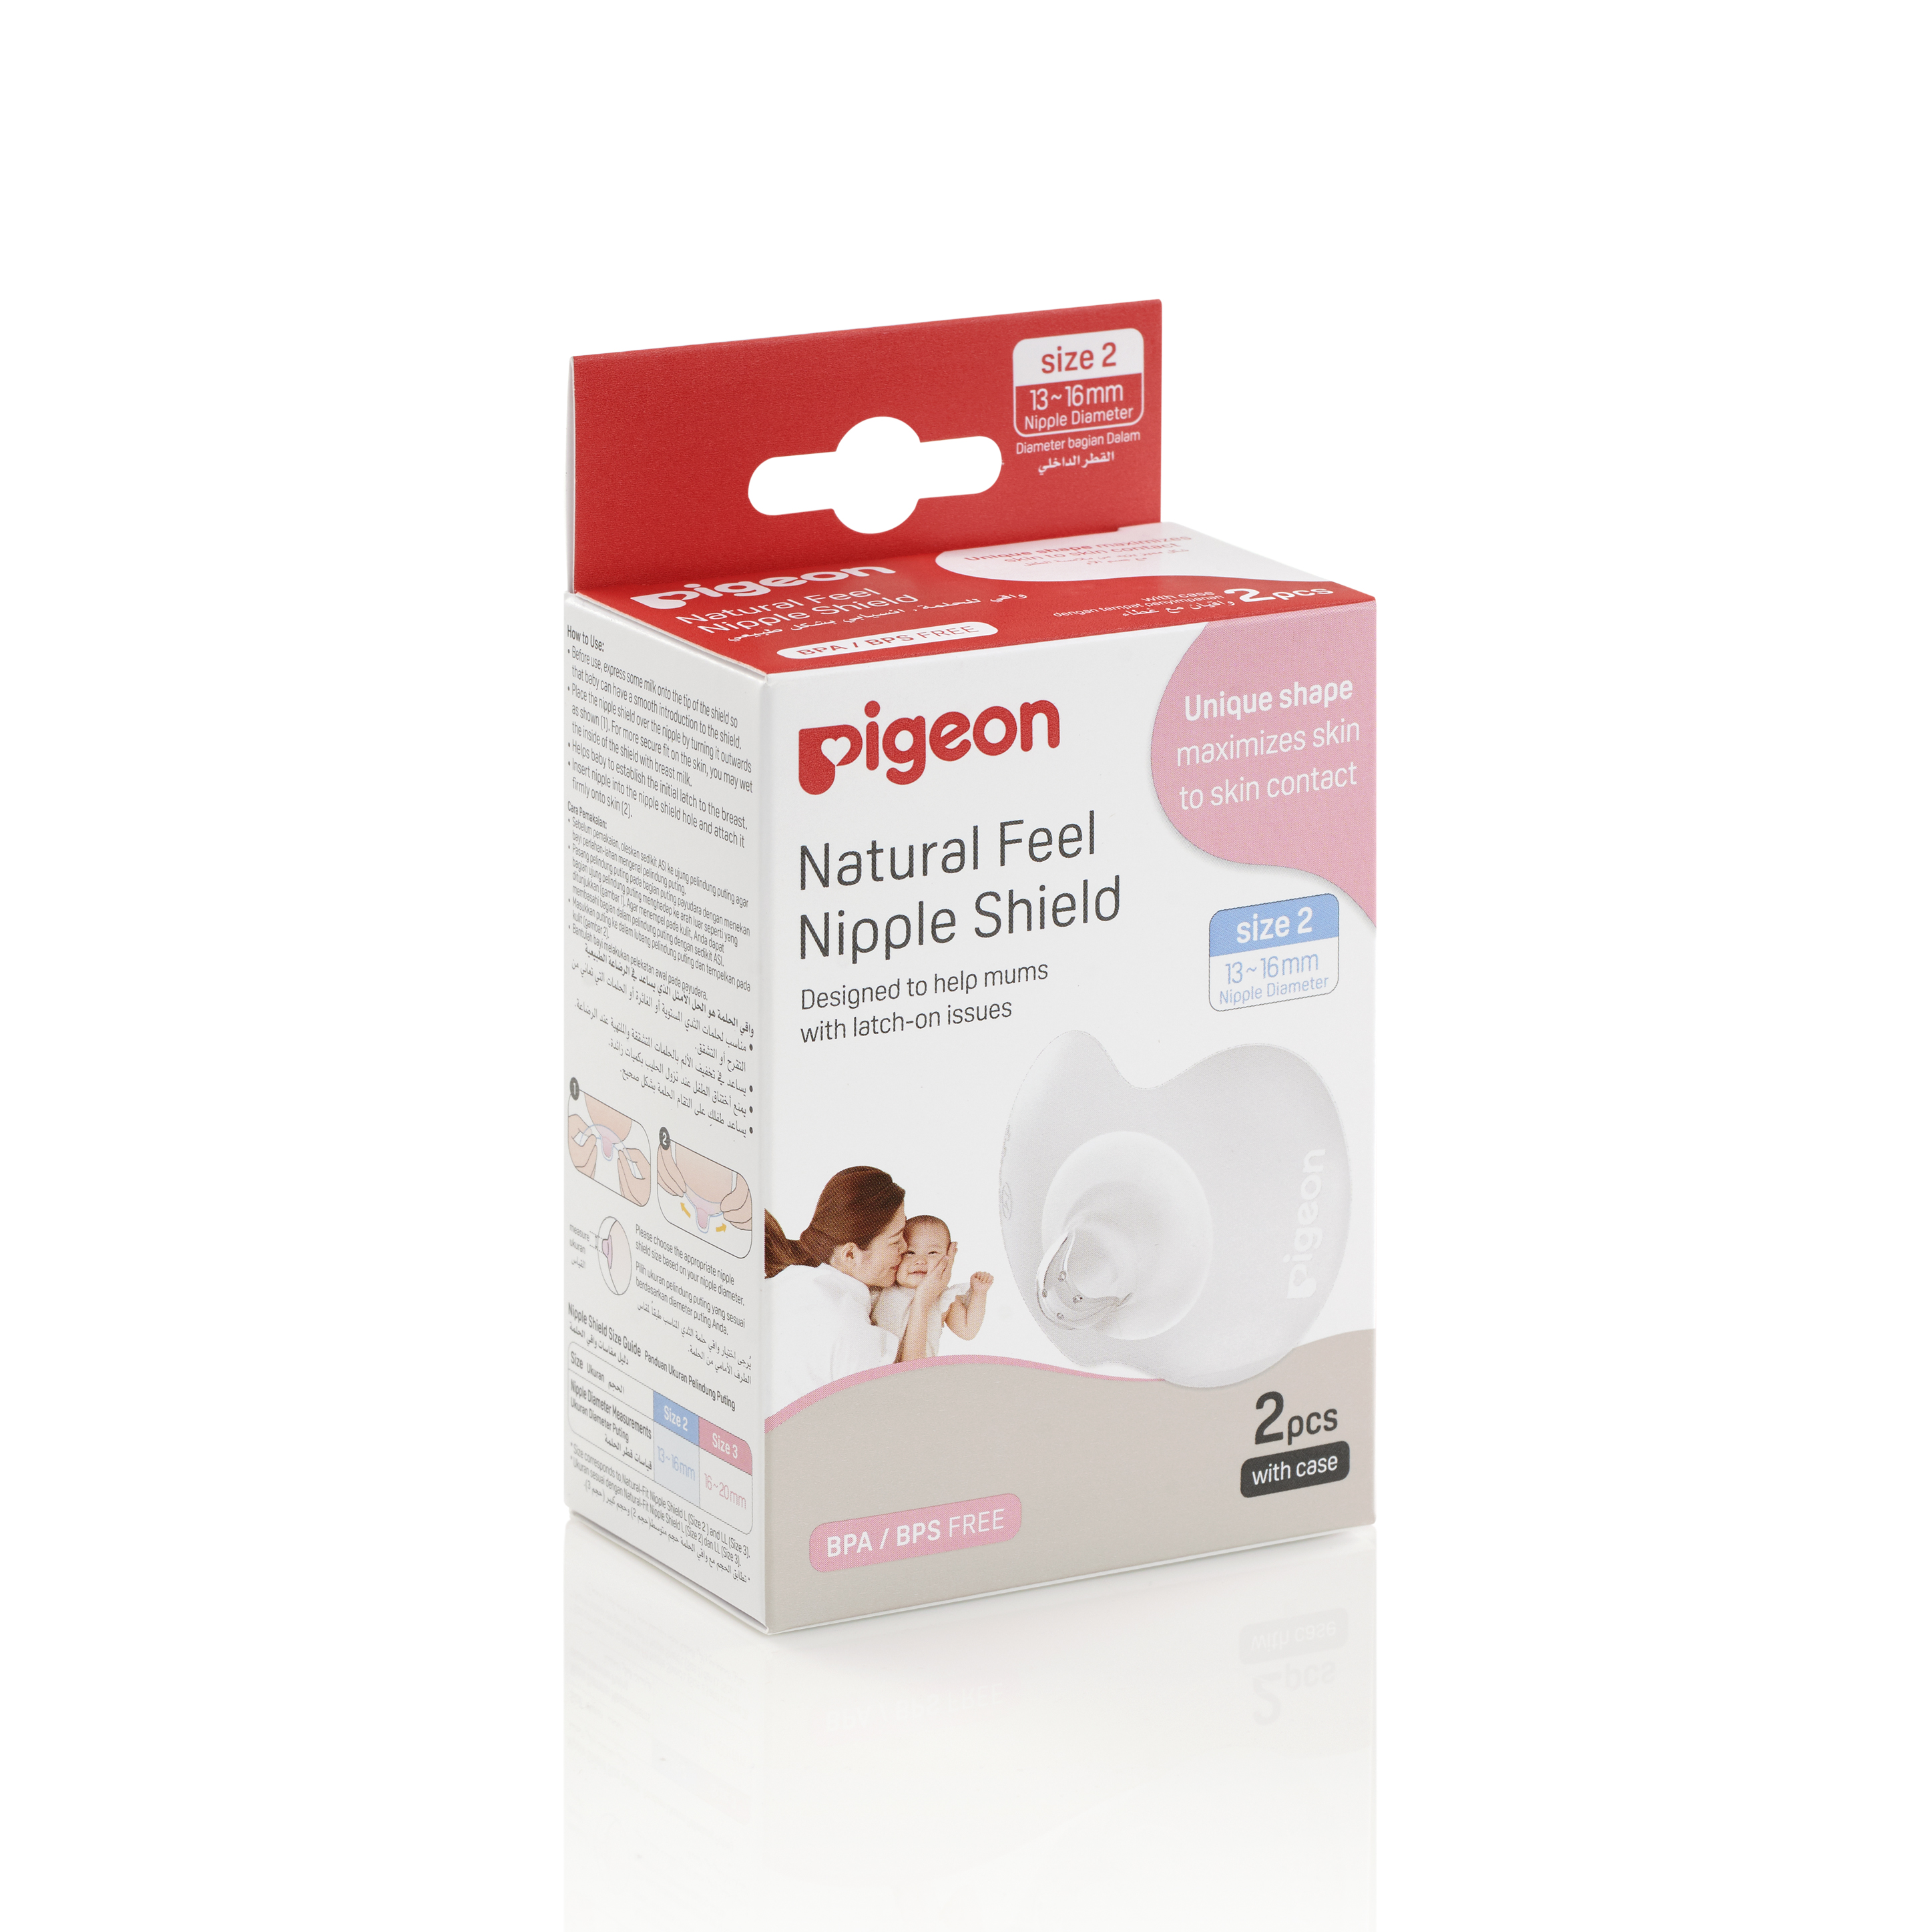 Pigeon Natural Feel Nipple Shield - Size 2 (M) (PG-79318)